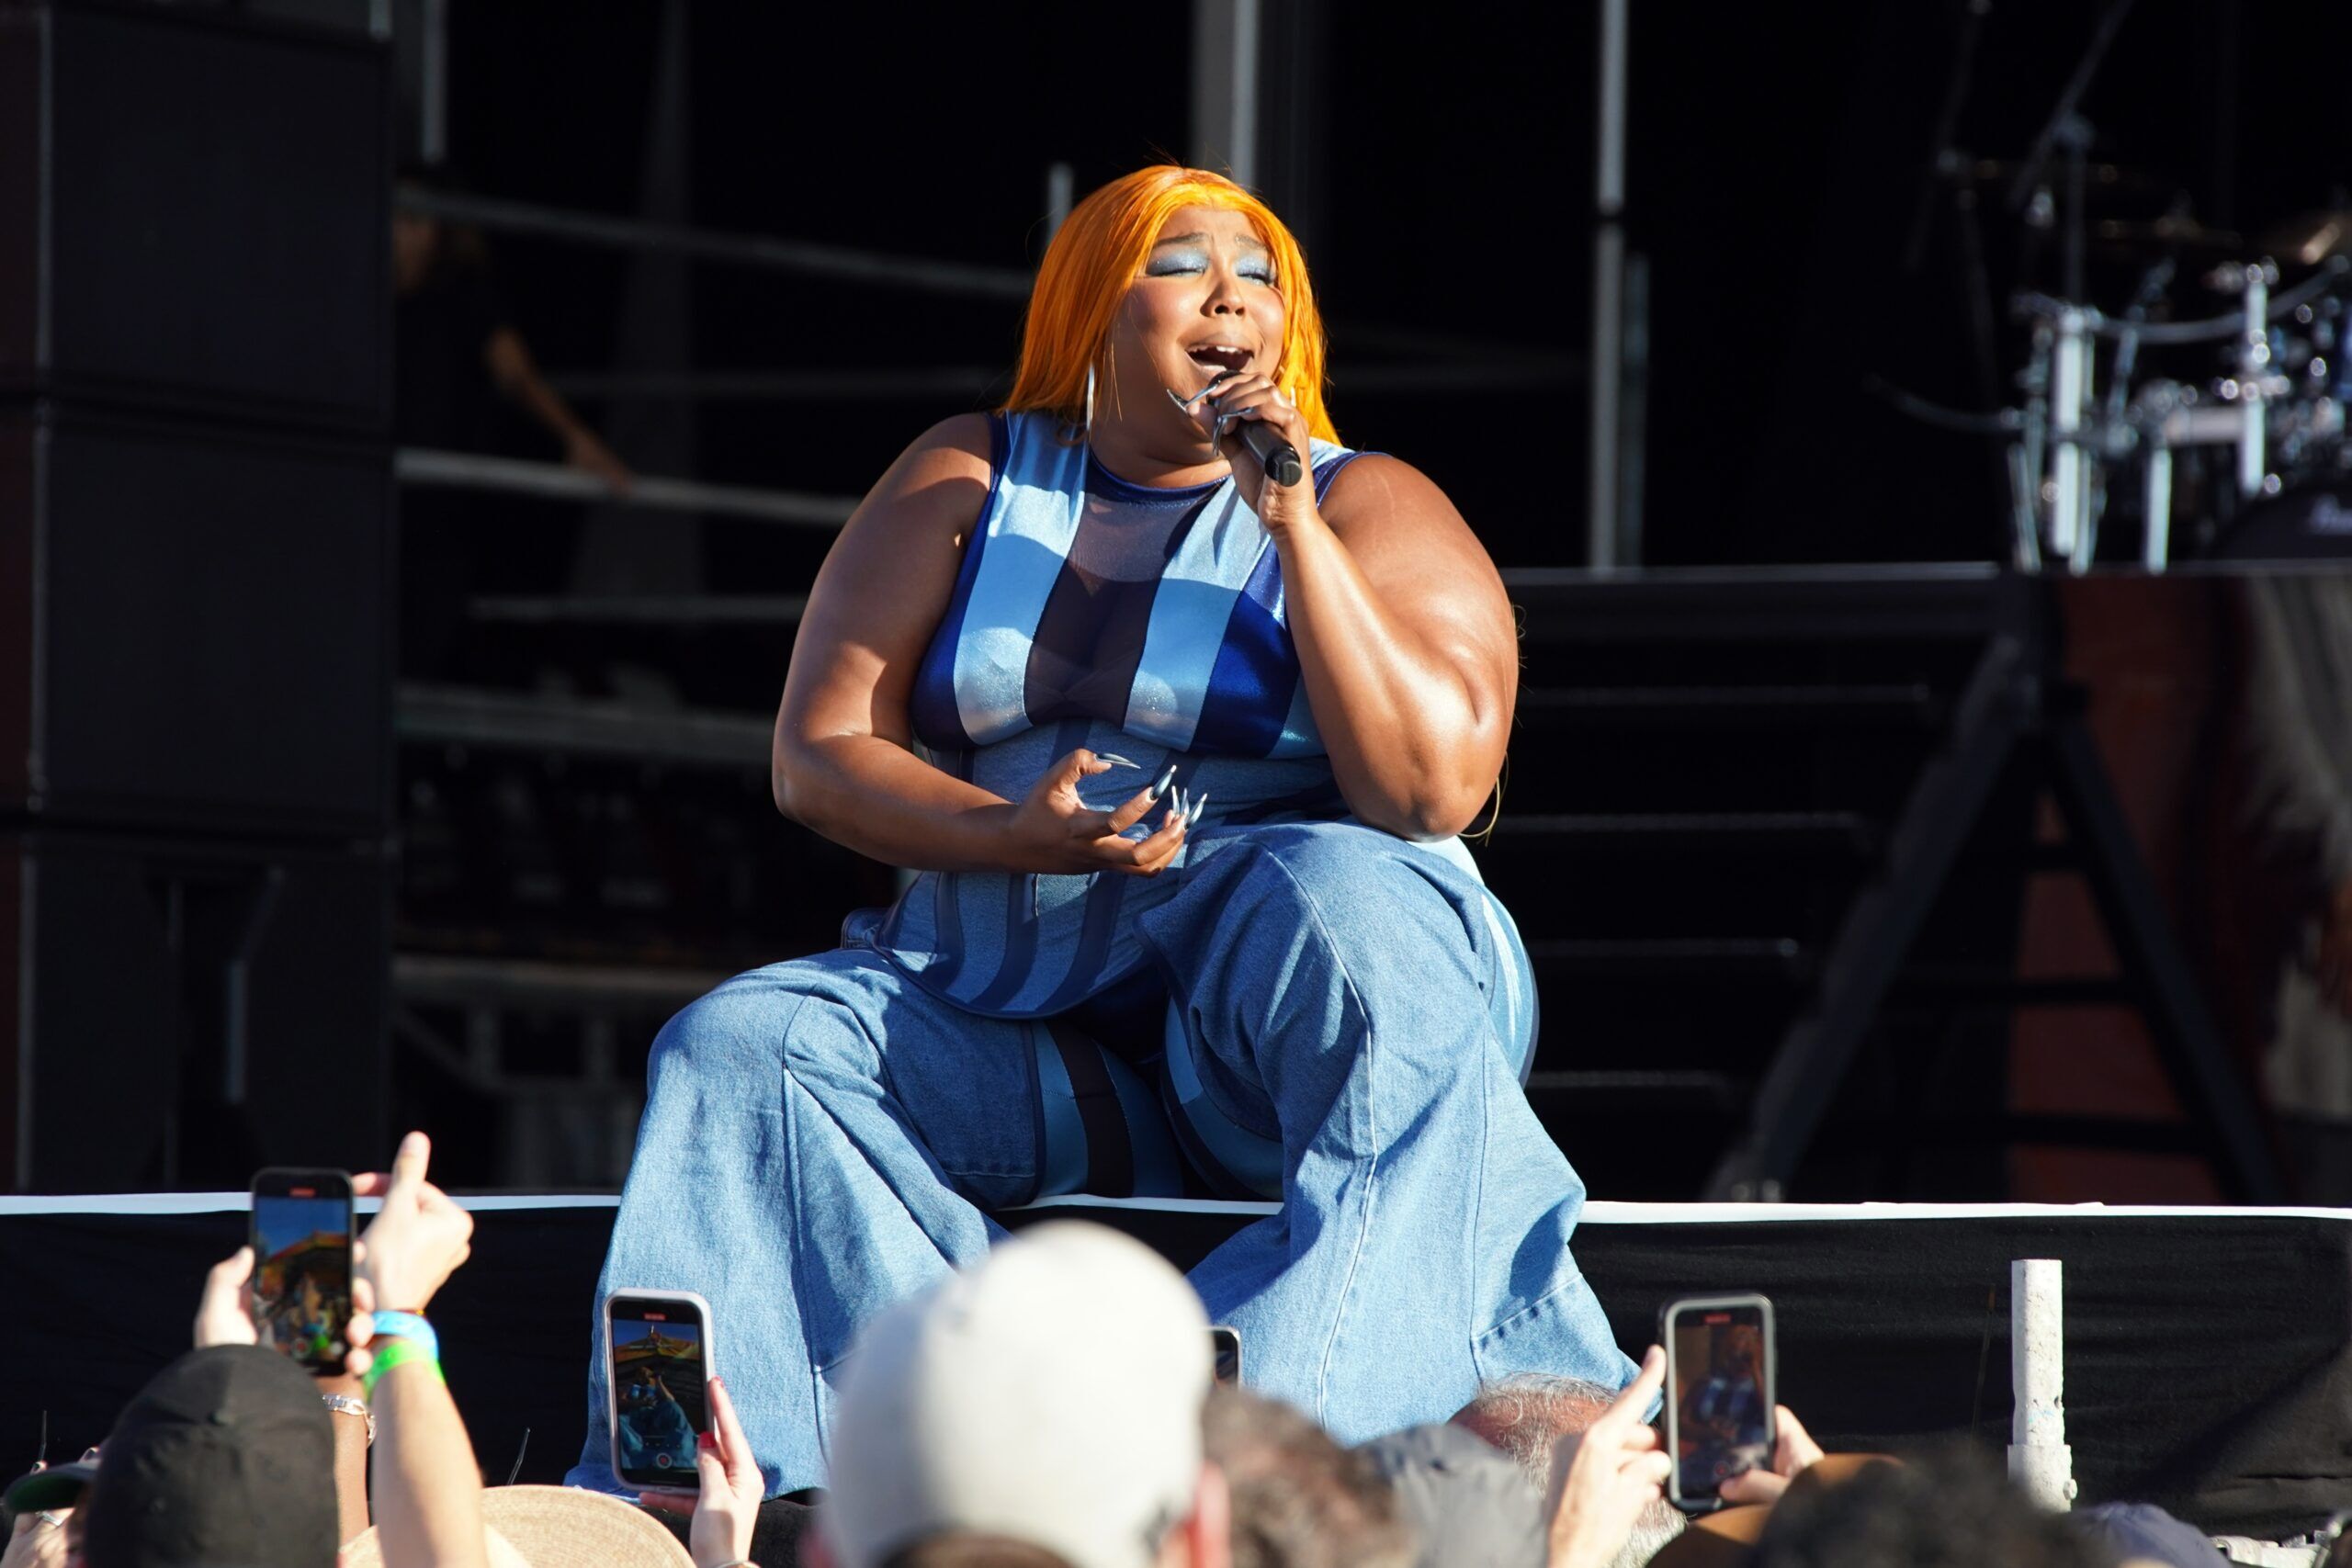 New Orleans, LA - April 28, 2023: Lizzo, an American rapper, singer and actress, headlines the "Festival Stage" at the 2023 New Orleans Jazz and Heritage Festival.